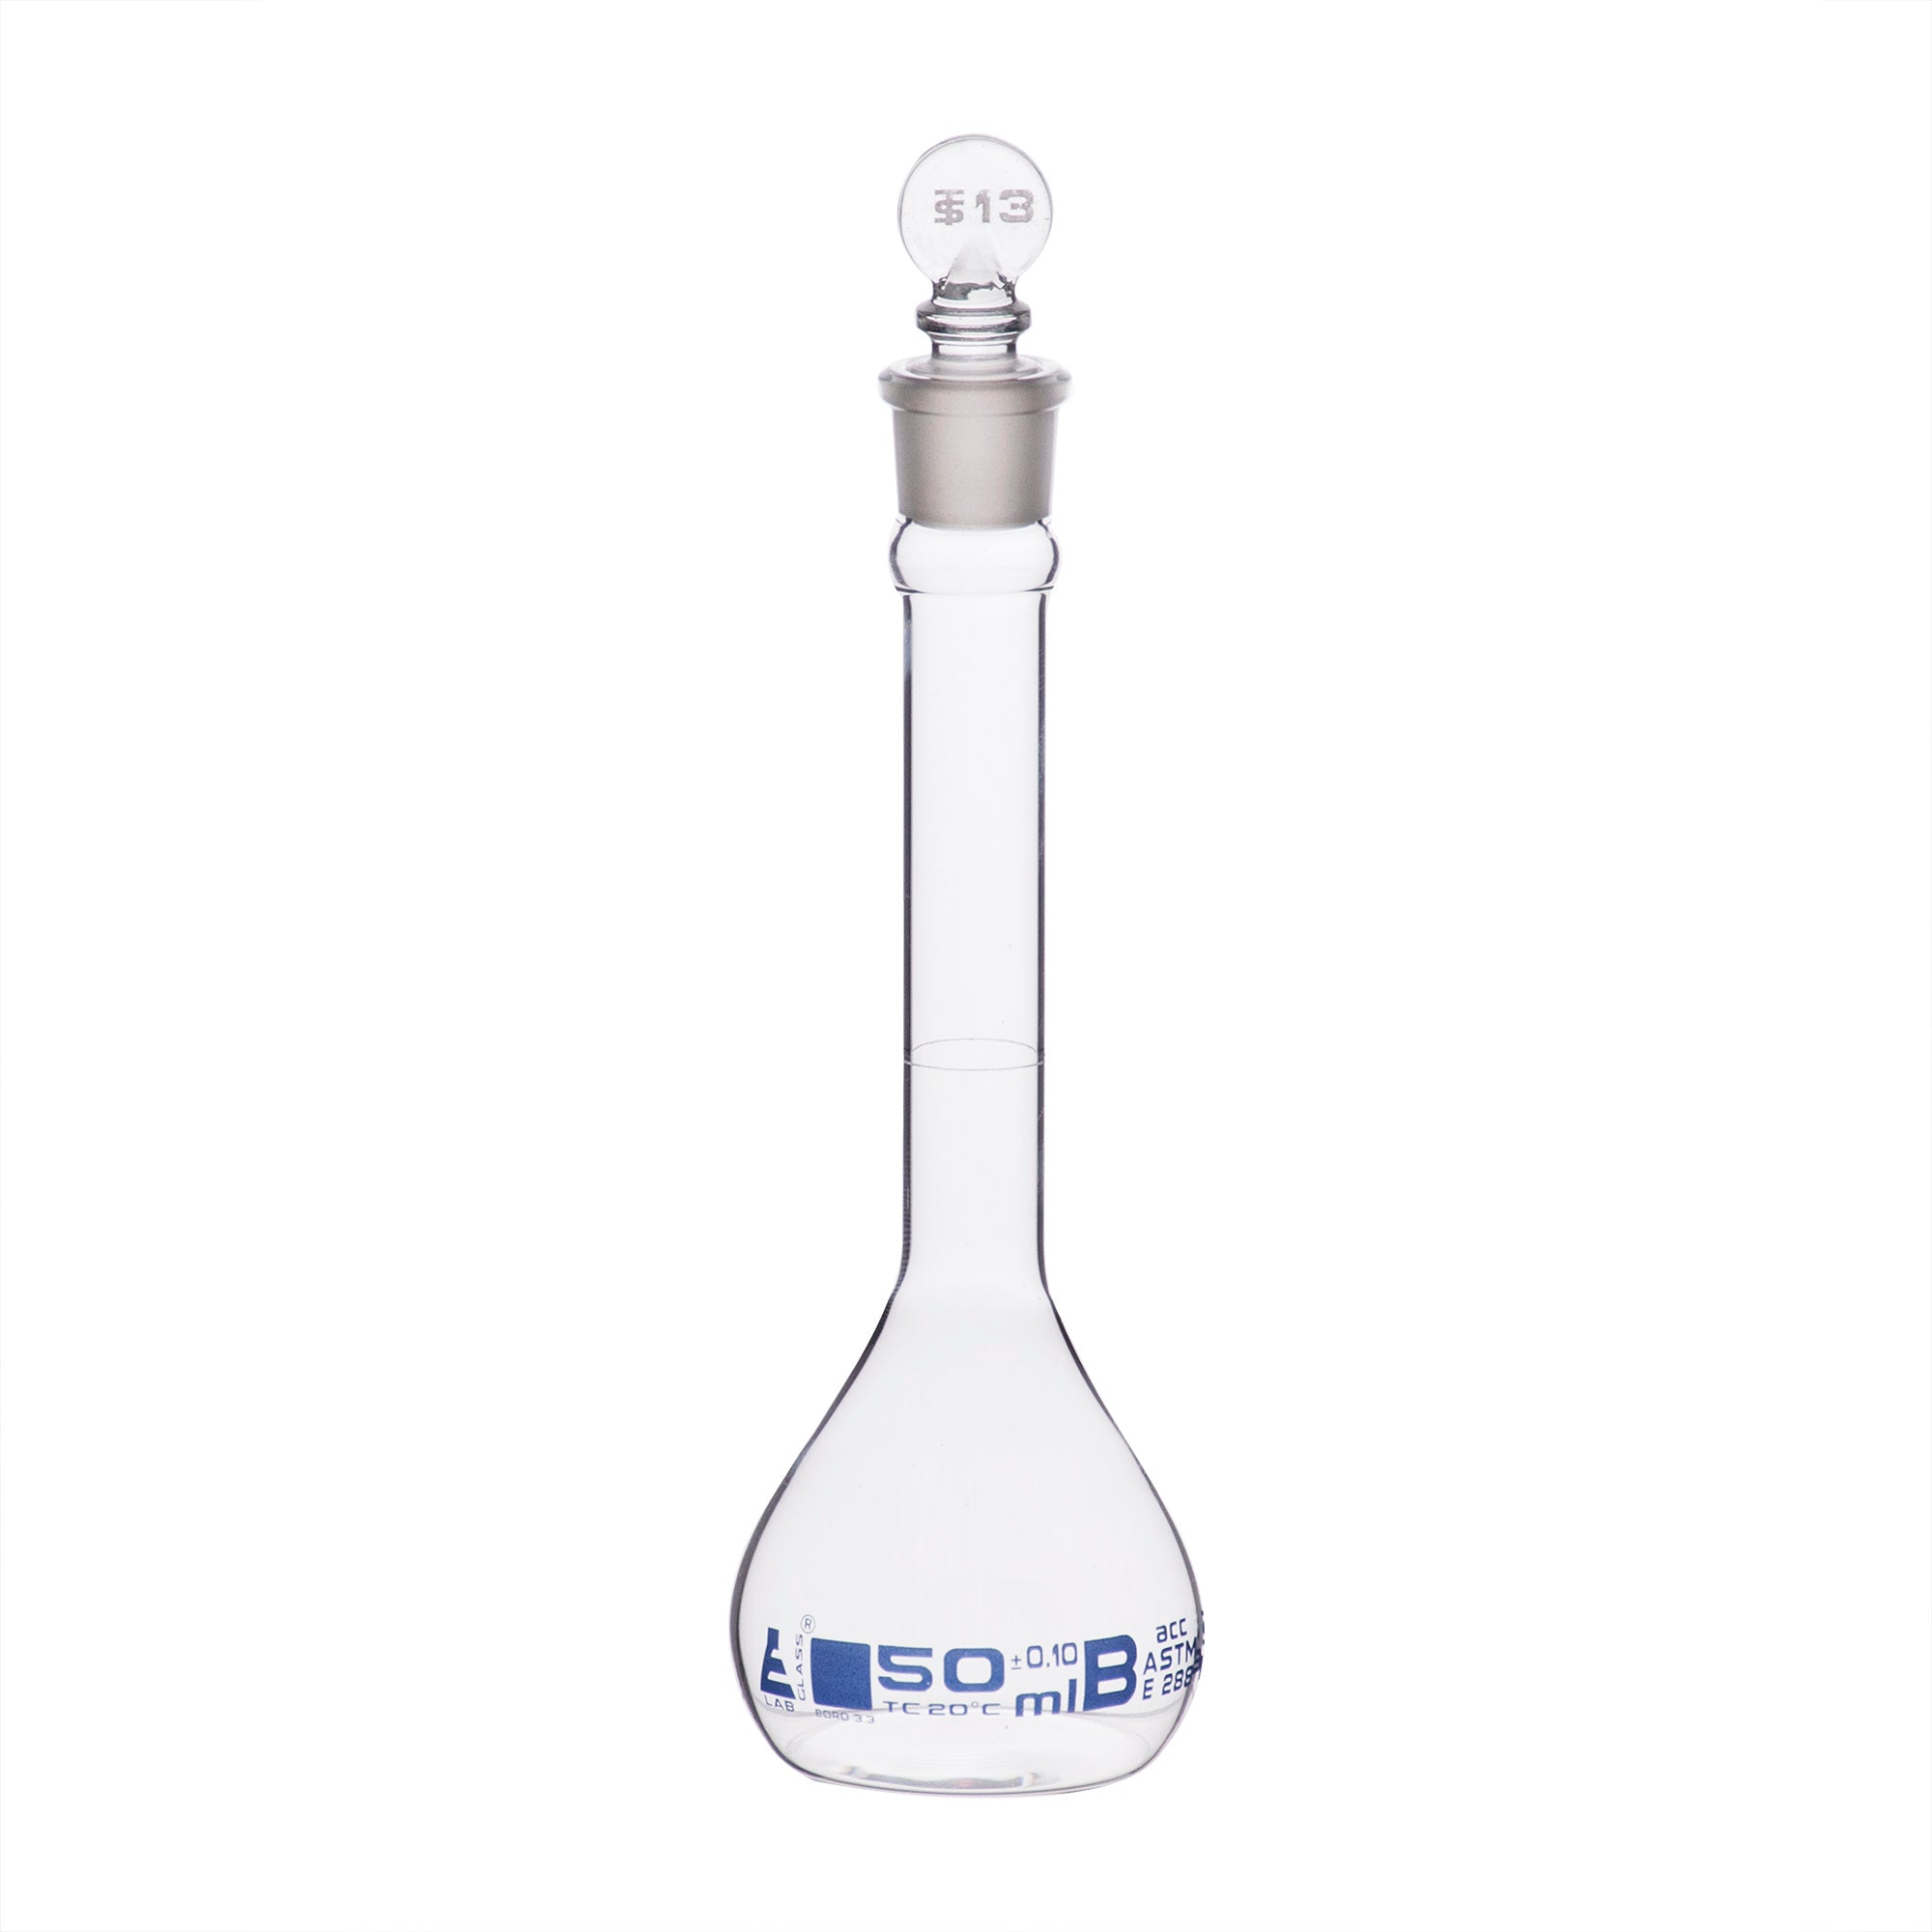 Borosilicate Glass ASTM Volumetric Flask with Glass Stopper, 50 ml, Class B, Autoclavable